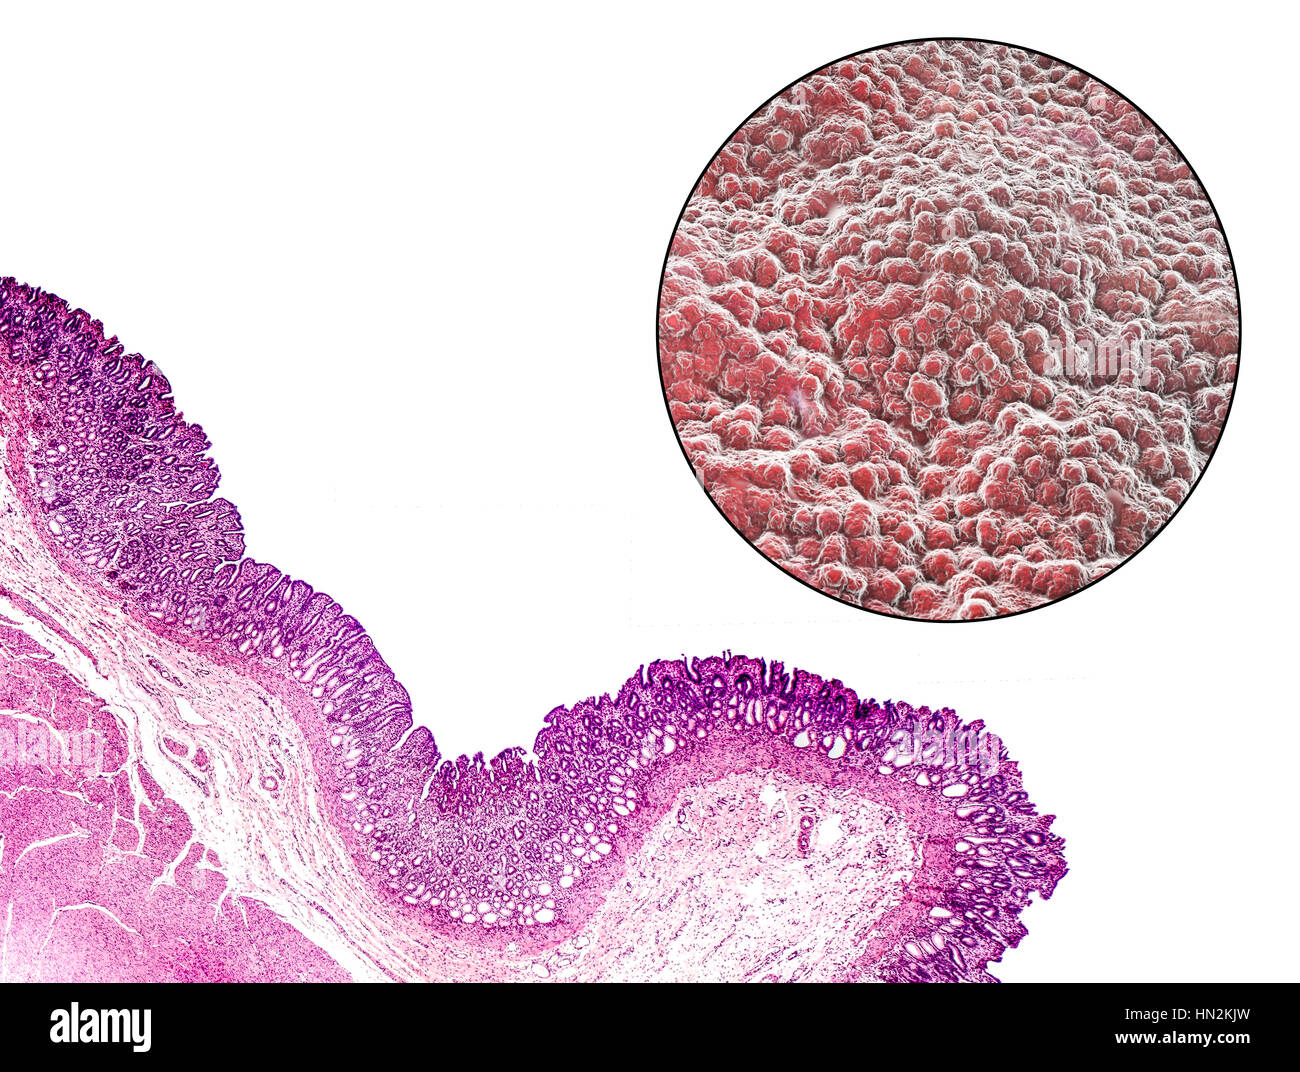 Stomach mucosa. Light micrograph (bottom left) and computer illustration (top right) of the lining of the stomach, known as the mucosa. The stomach is a muscular sac involved in storage and digestion of food. The surface of the mucosa consists of simple columnar cells (dark purple in micrograph) that secrete mucus. The mucus protects the stomach lining from digestive acids and enzymes that act on food in the stomach. Beneath the columnar cells are gastric pits, the glands that make the acids and enzymes needed to digest food. Stock Photo